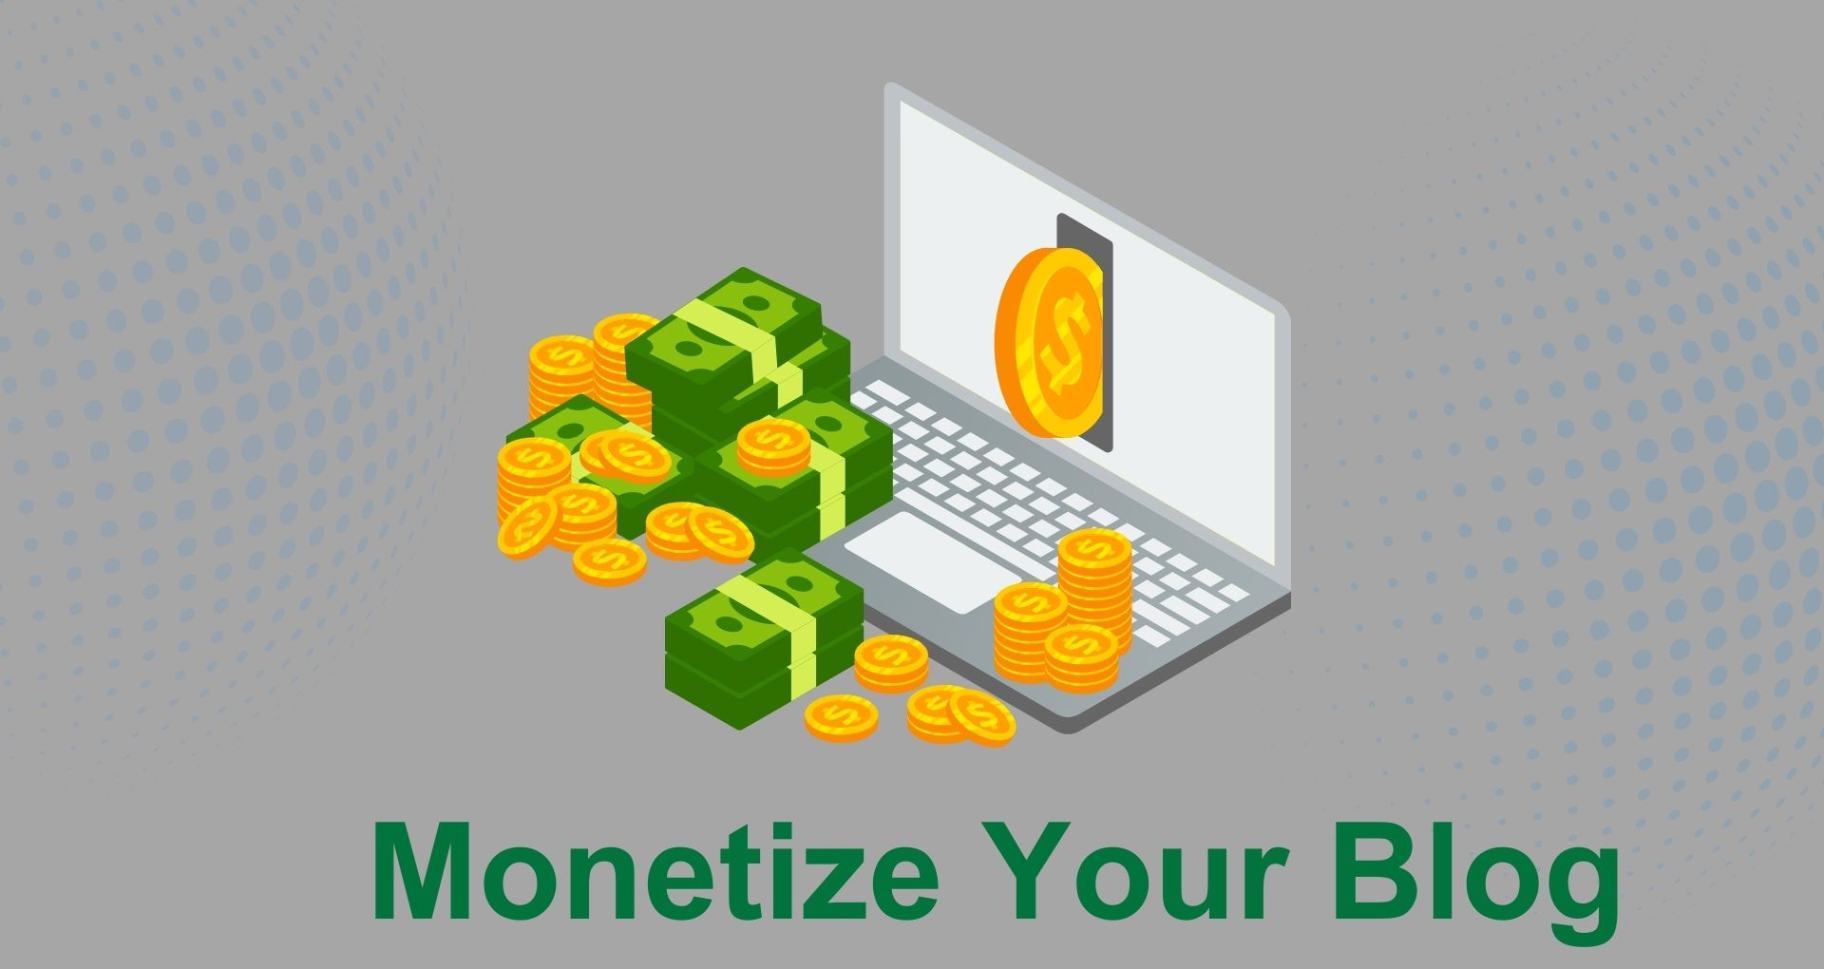 Can you make money blogging